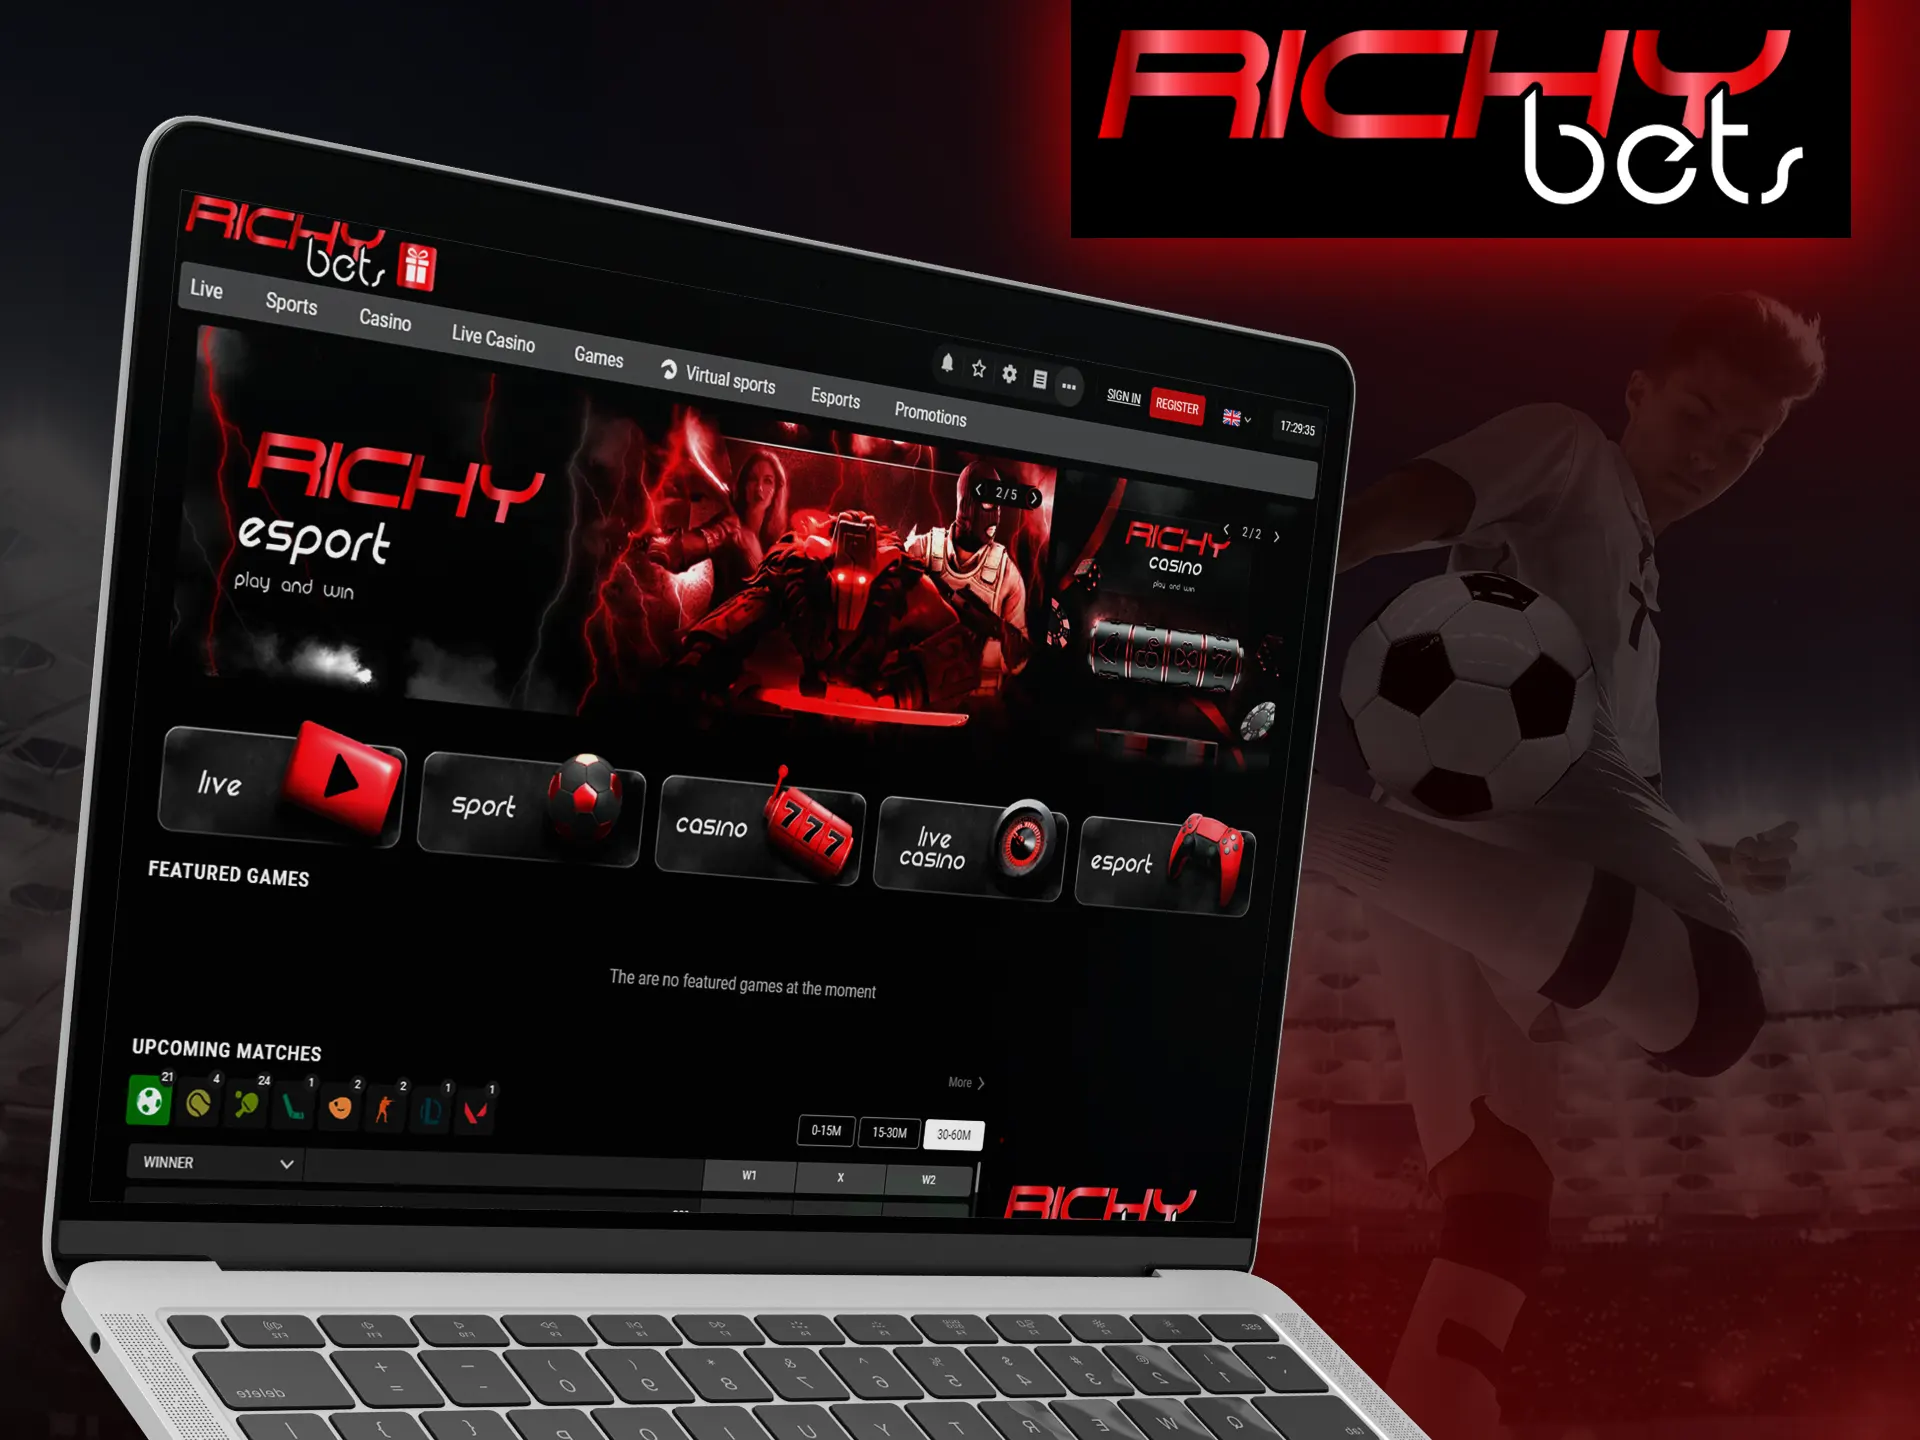 Visit the Richybets official website for more information.